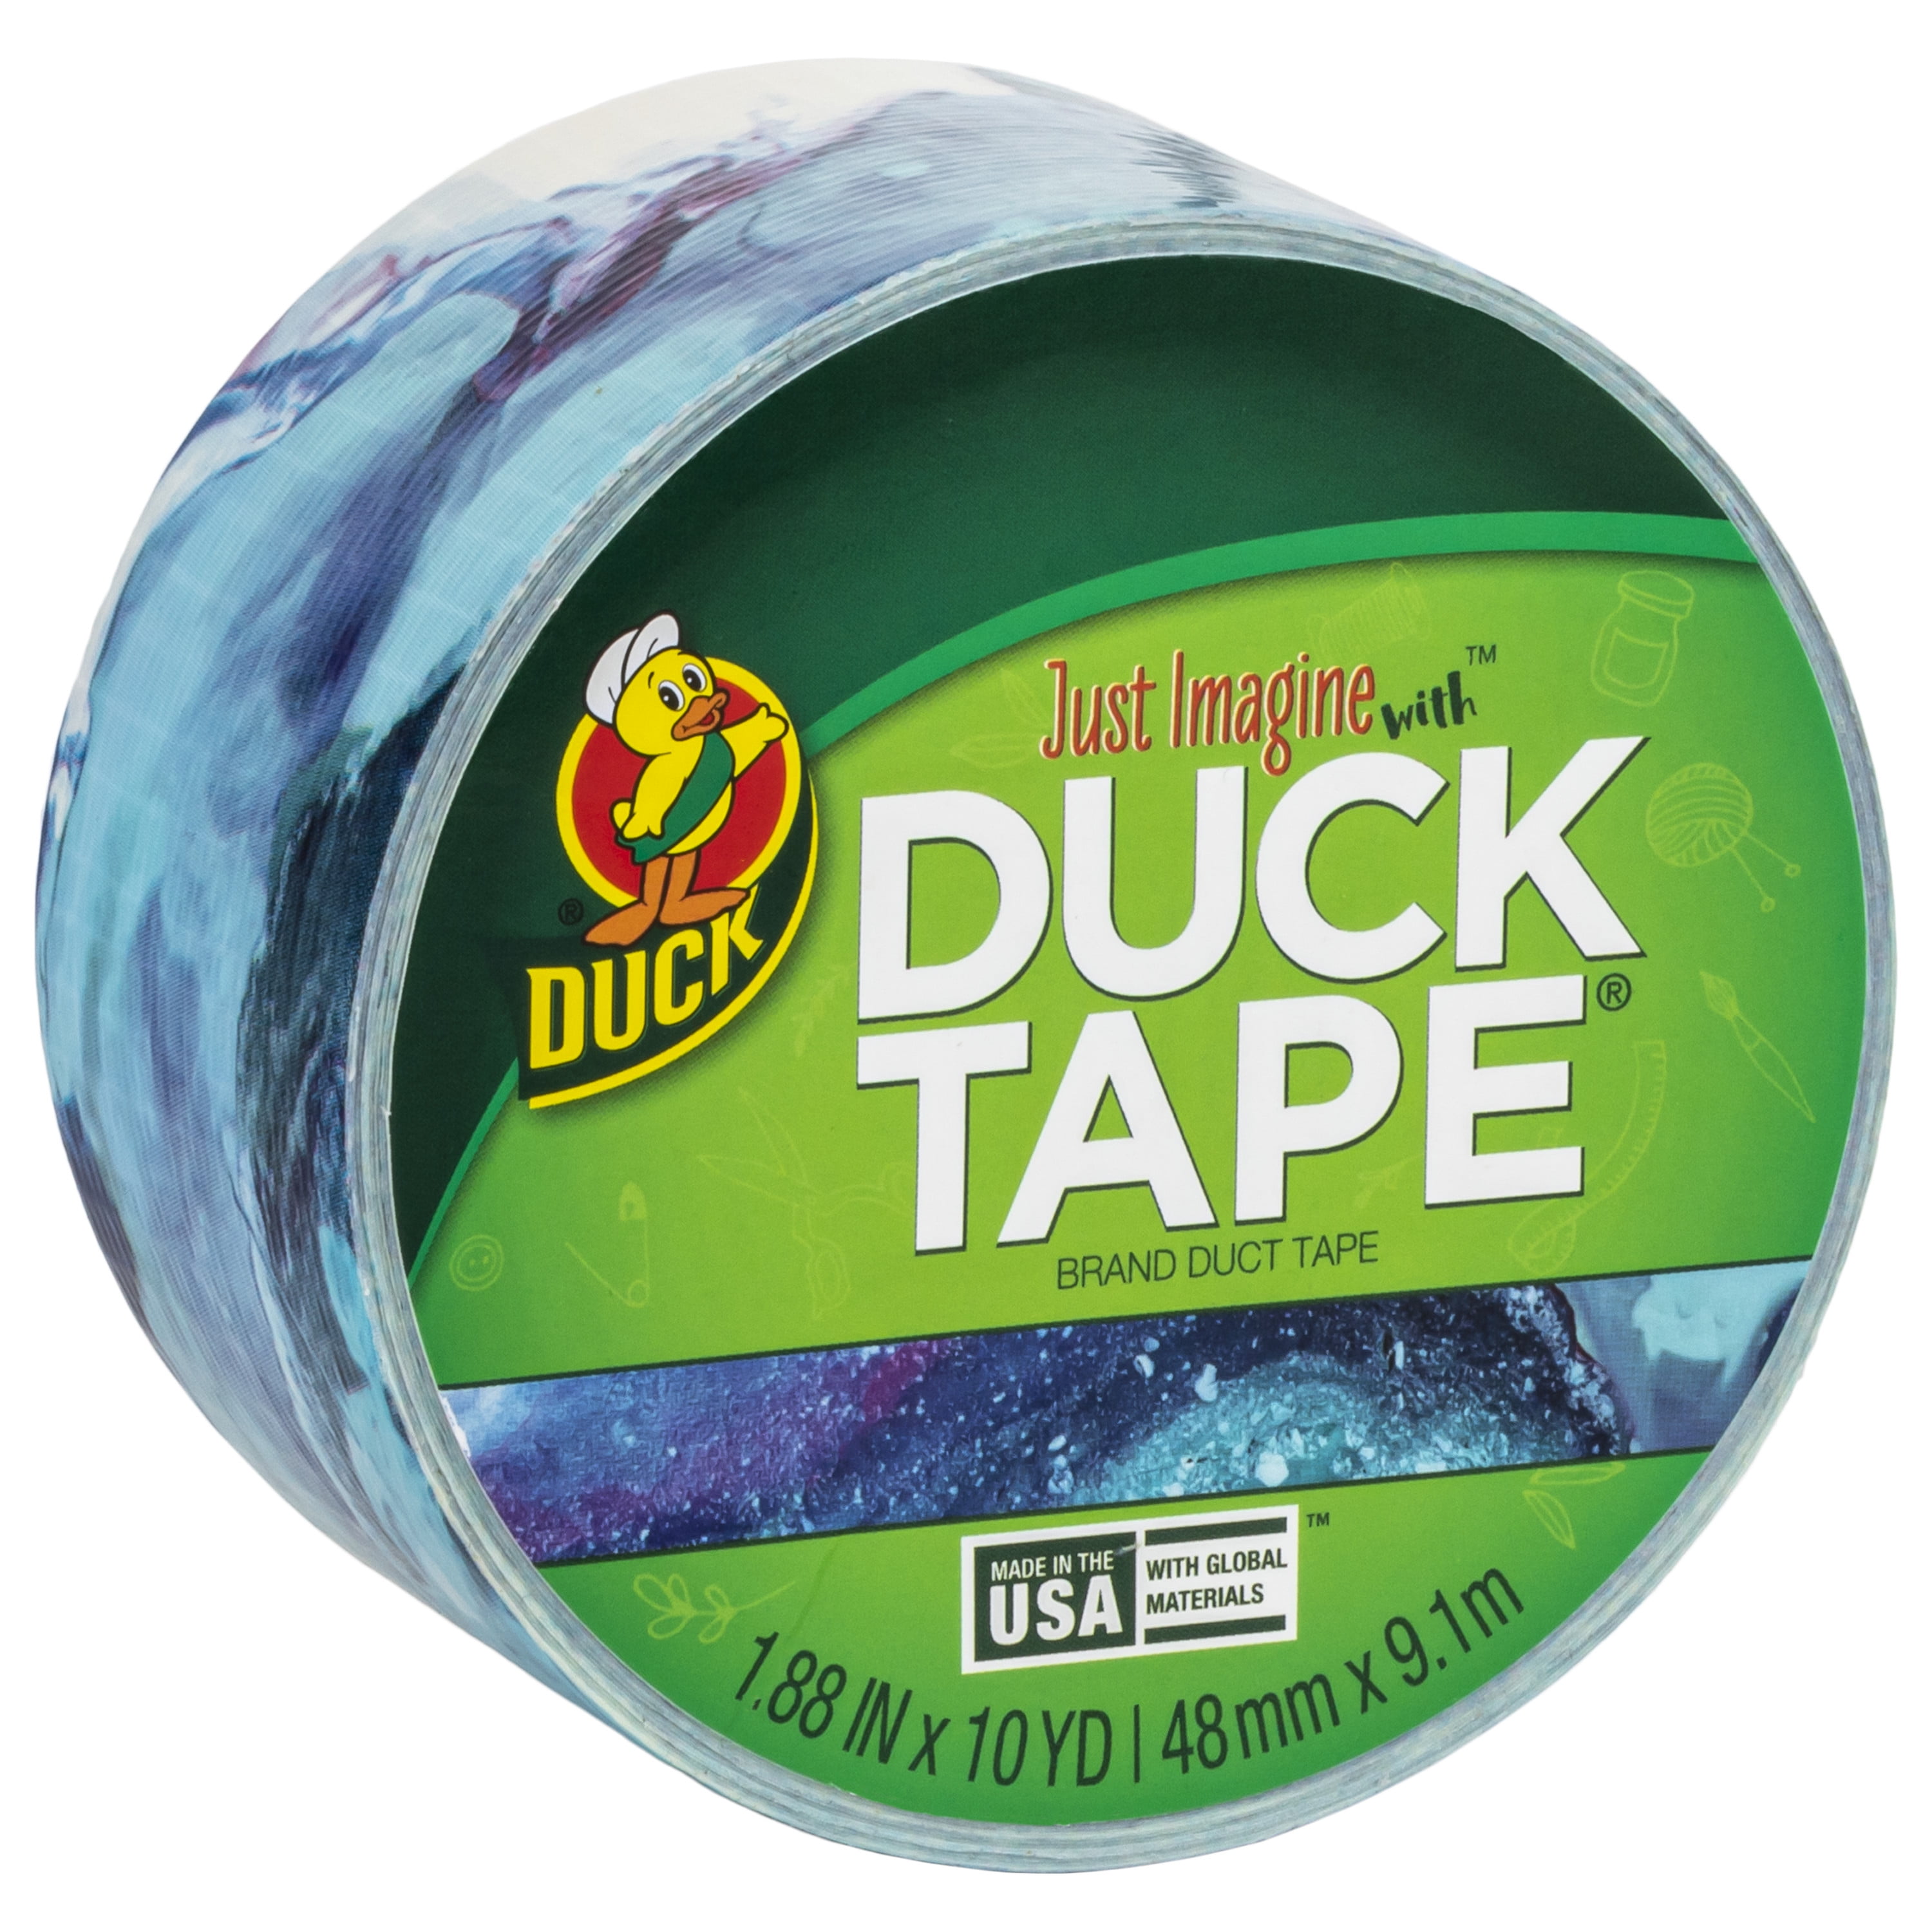 Printed Duck Tape Brand Duct Tape - Marbling 10 Yards 